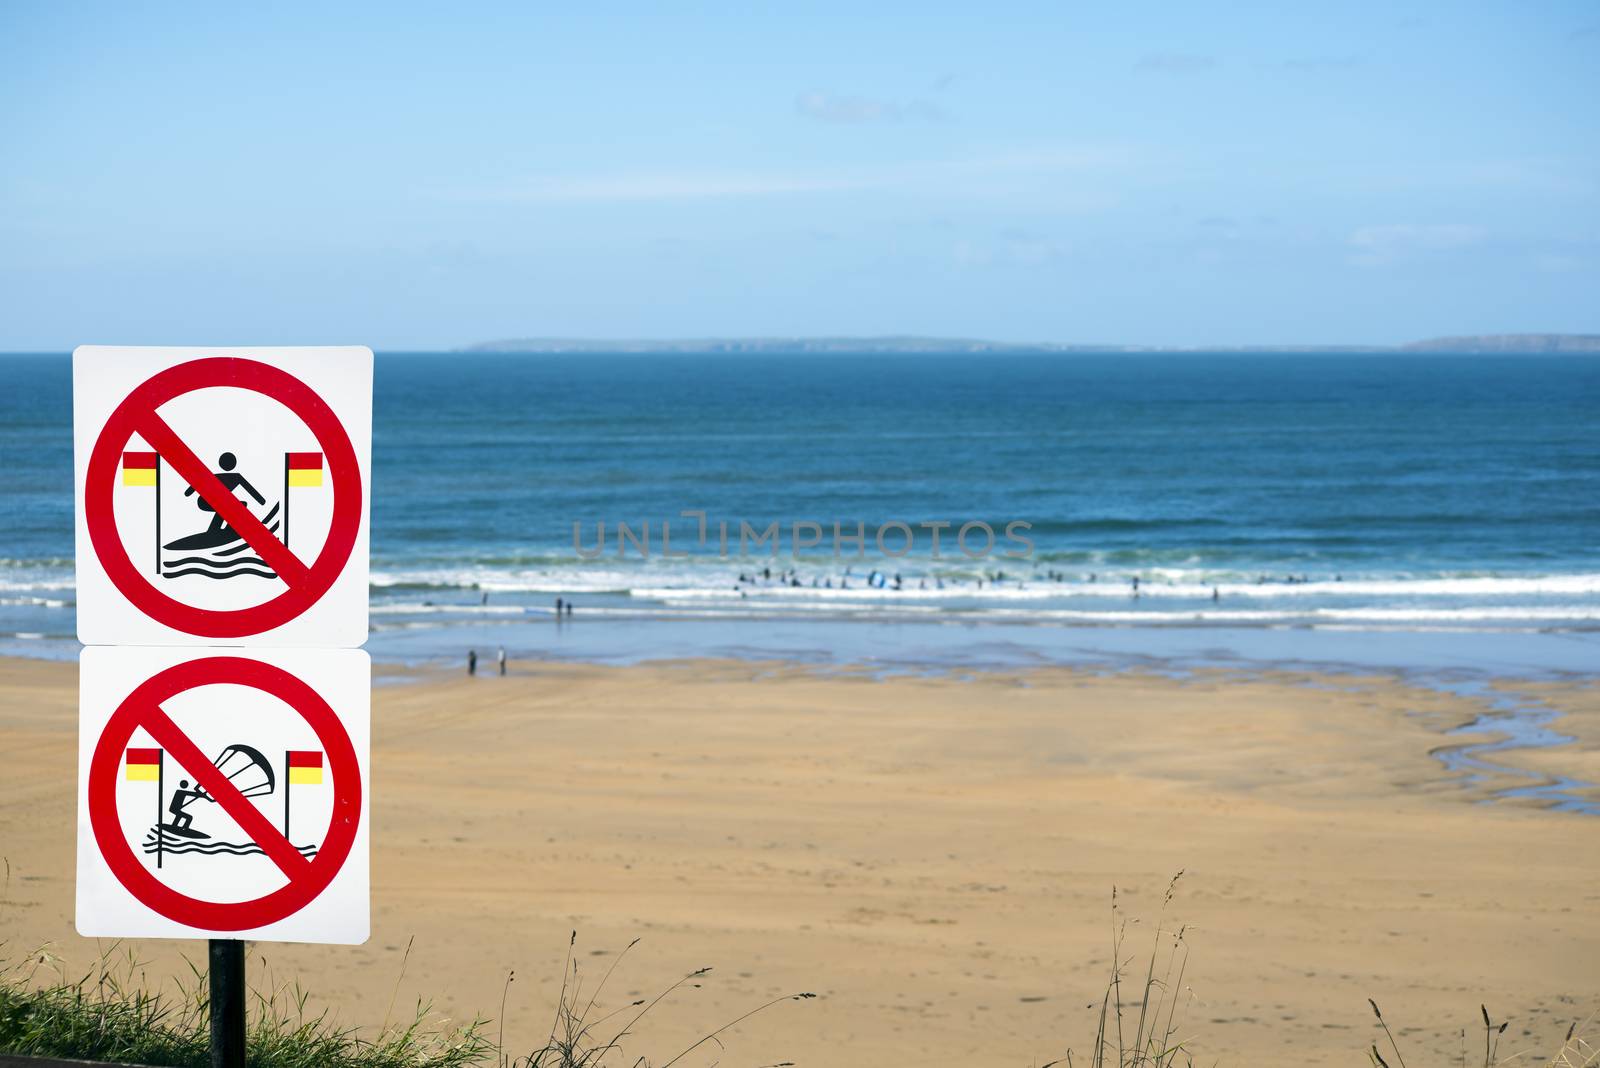 warning signs for surfers in ballybunion by morrbyte